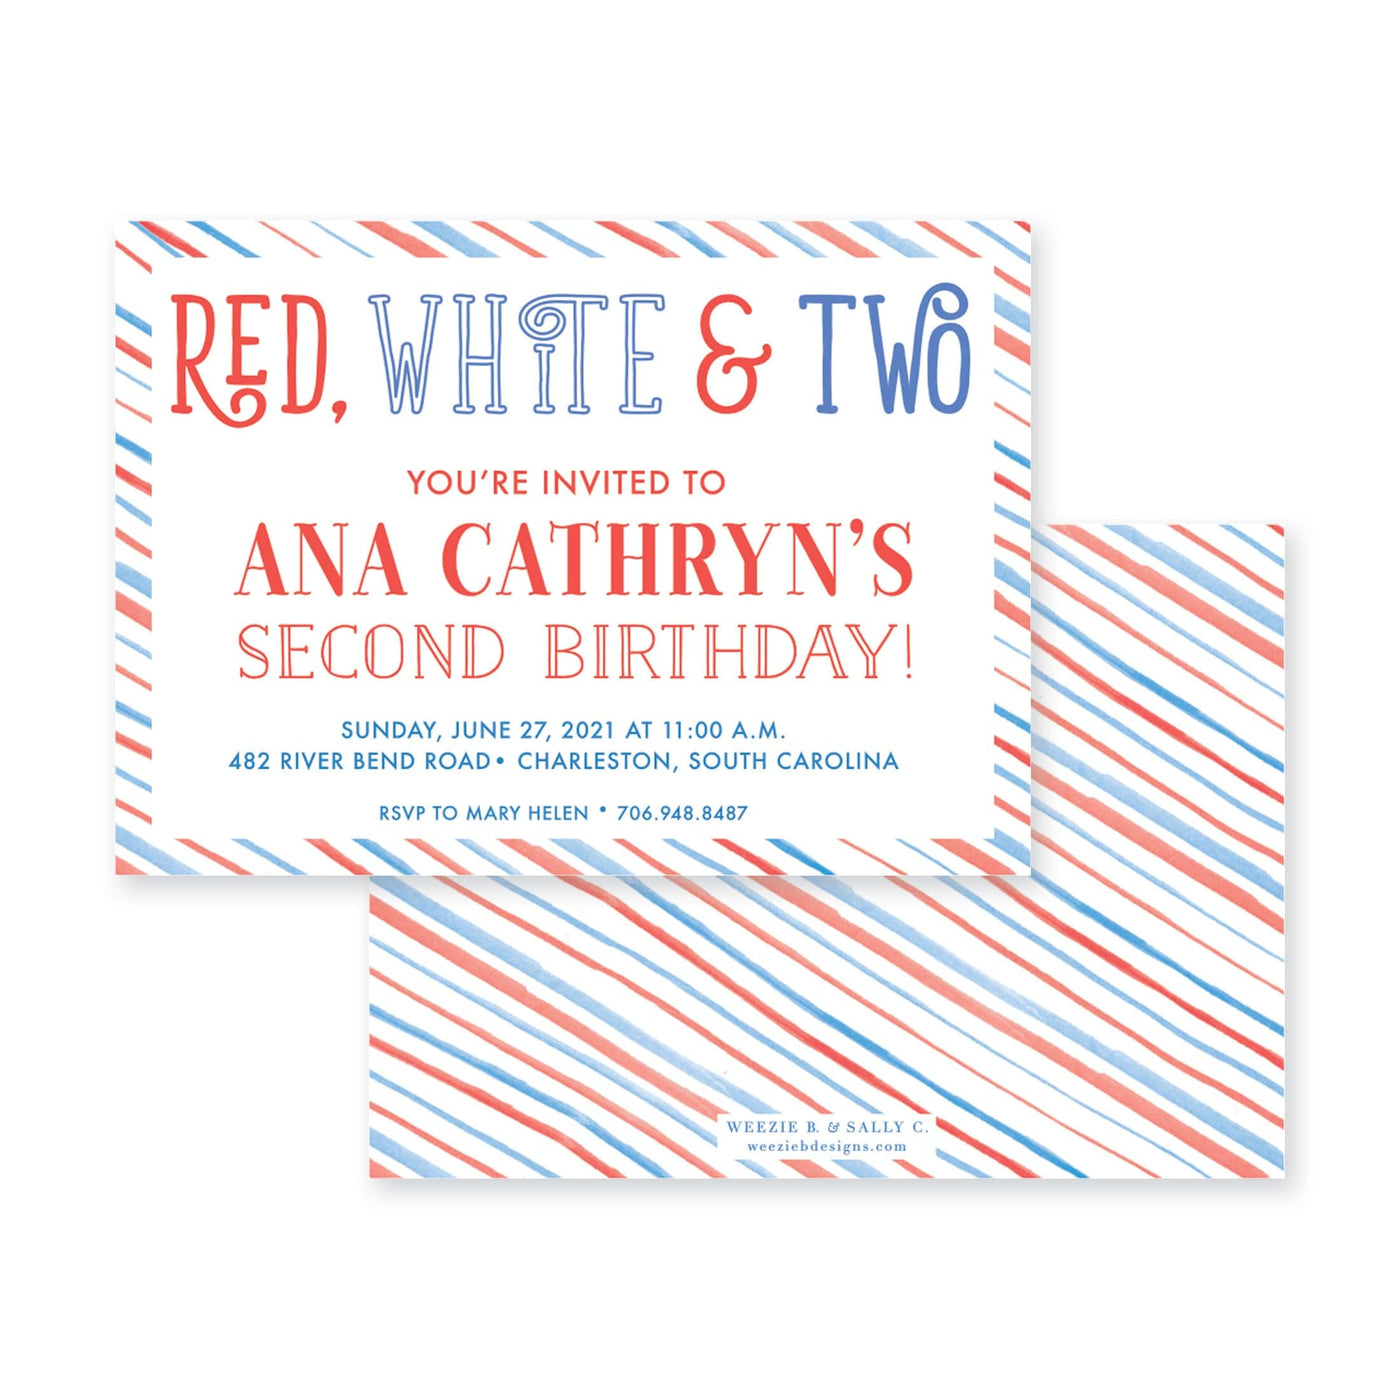 Red, White & Two Birthday